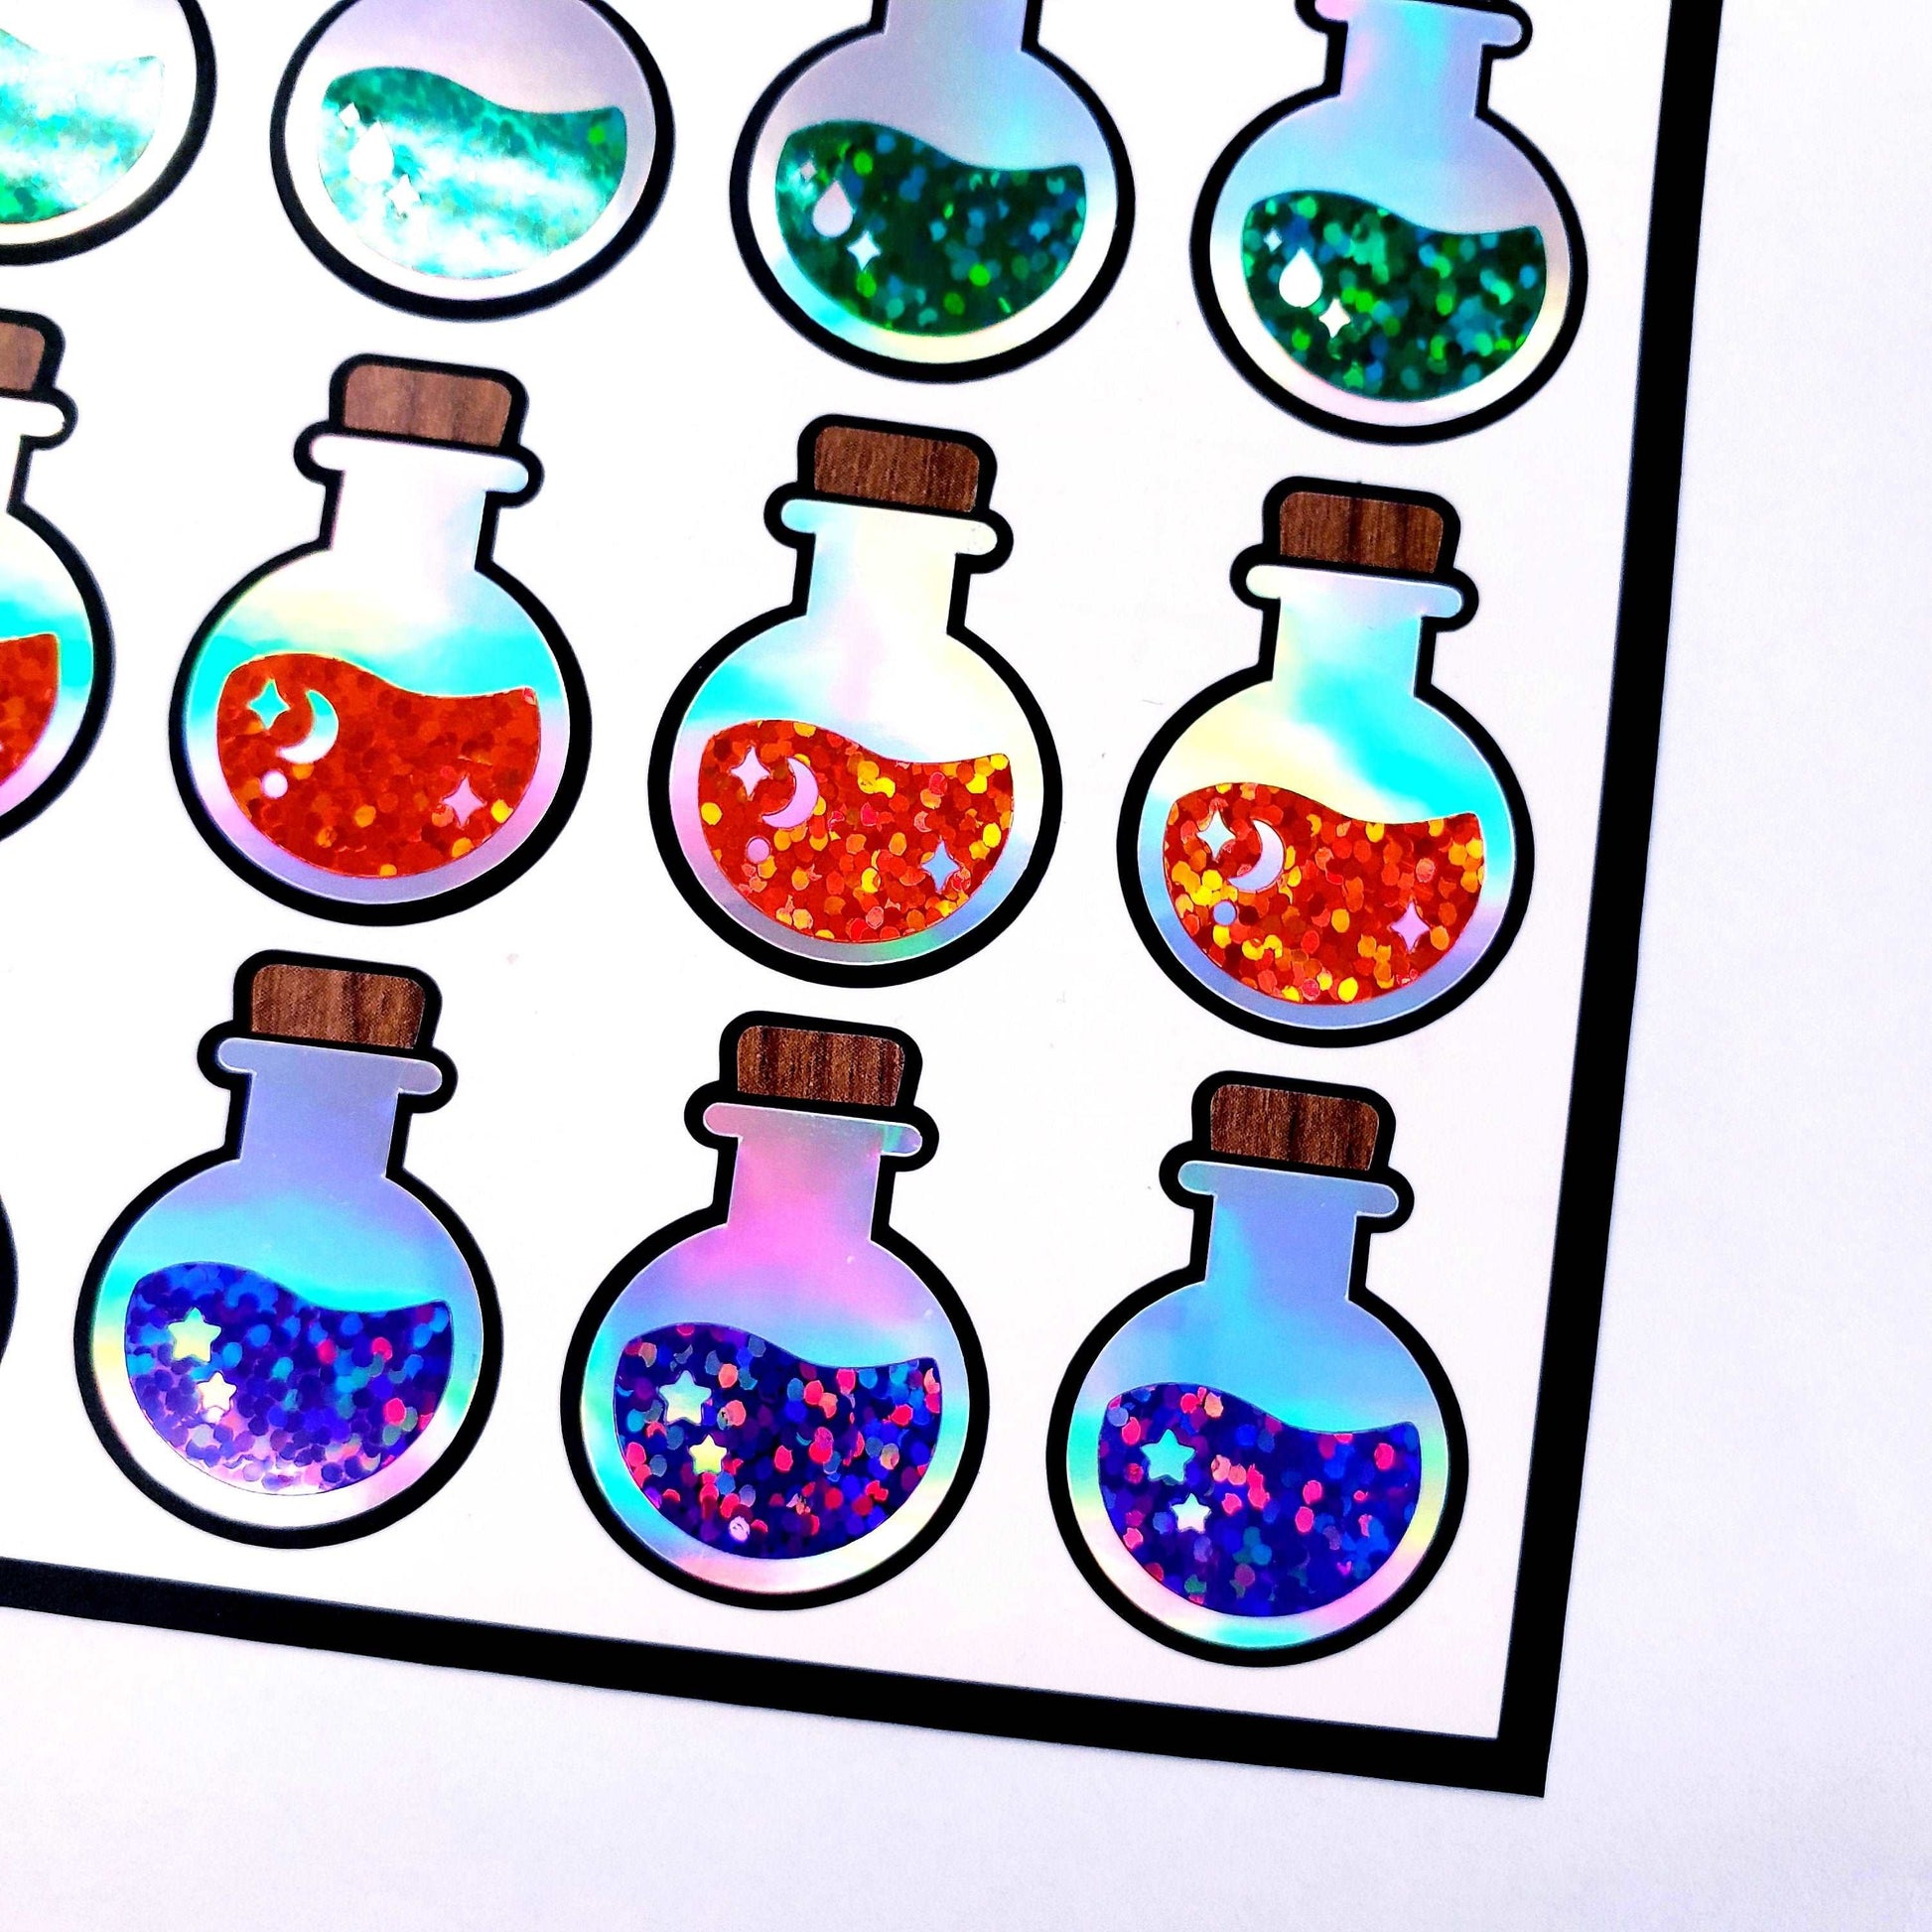 Halloween Potion Bottles Sticker Sheet. Set of 20 magic spell jar stickers for cards, journals, calendars and party drink cups. Witchy vibe.